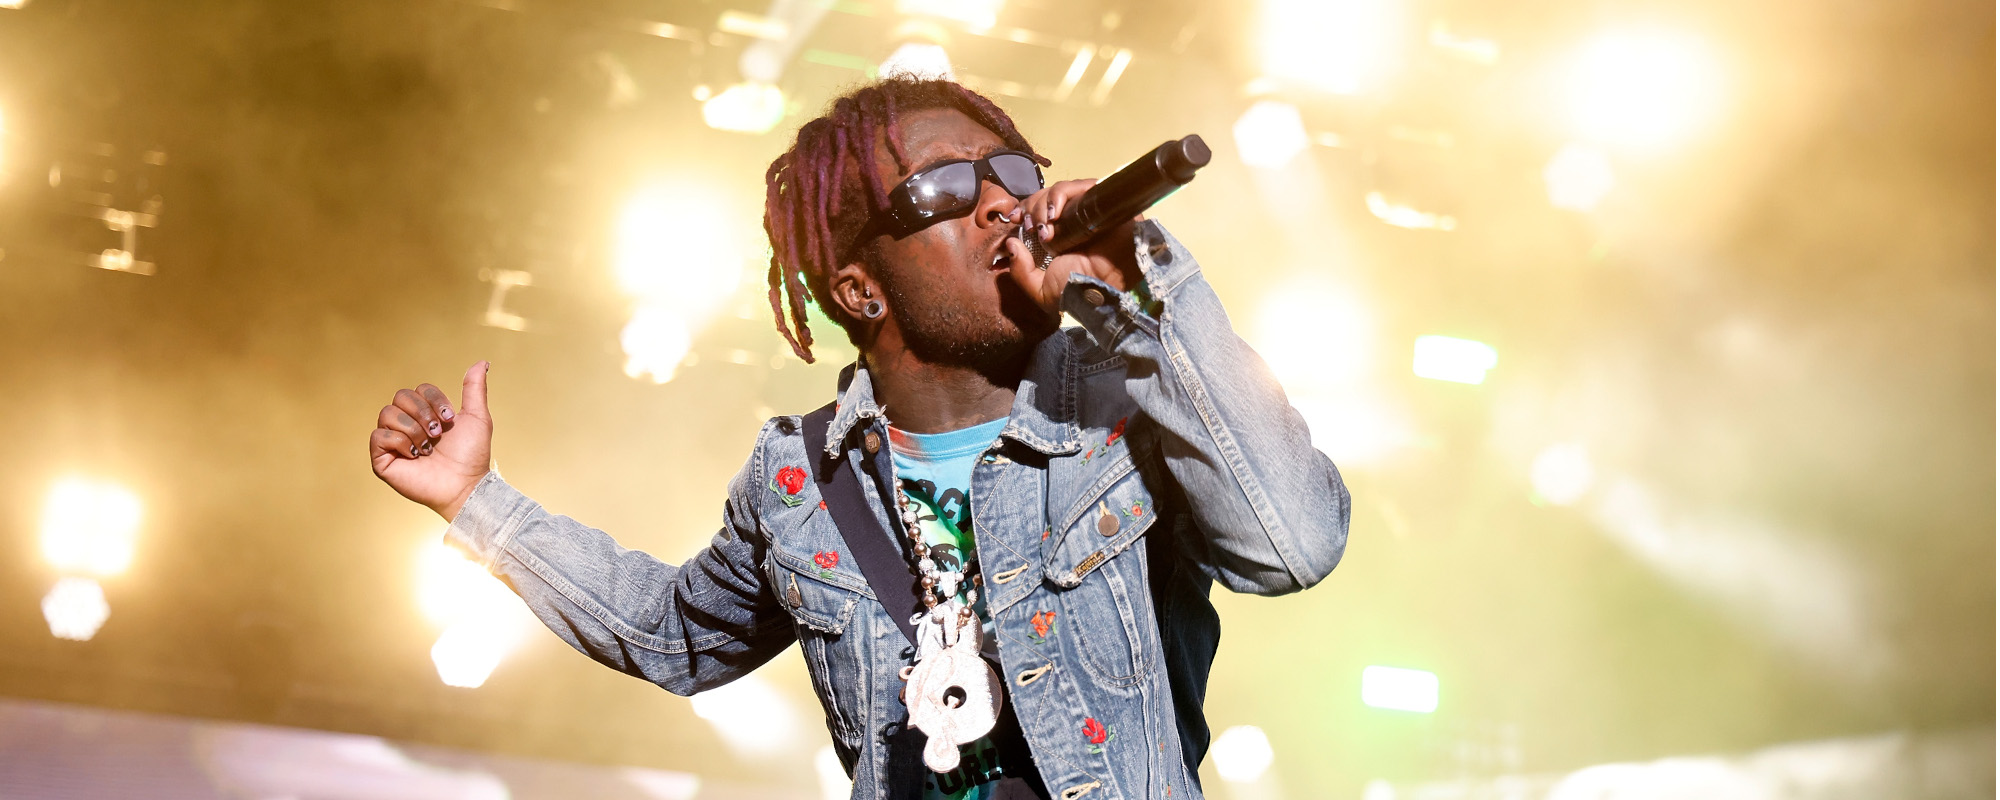 Lil Uzi Vert Hints at Joint Album with Young Thug after ‘Pink Tape’ Hits No. 1